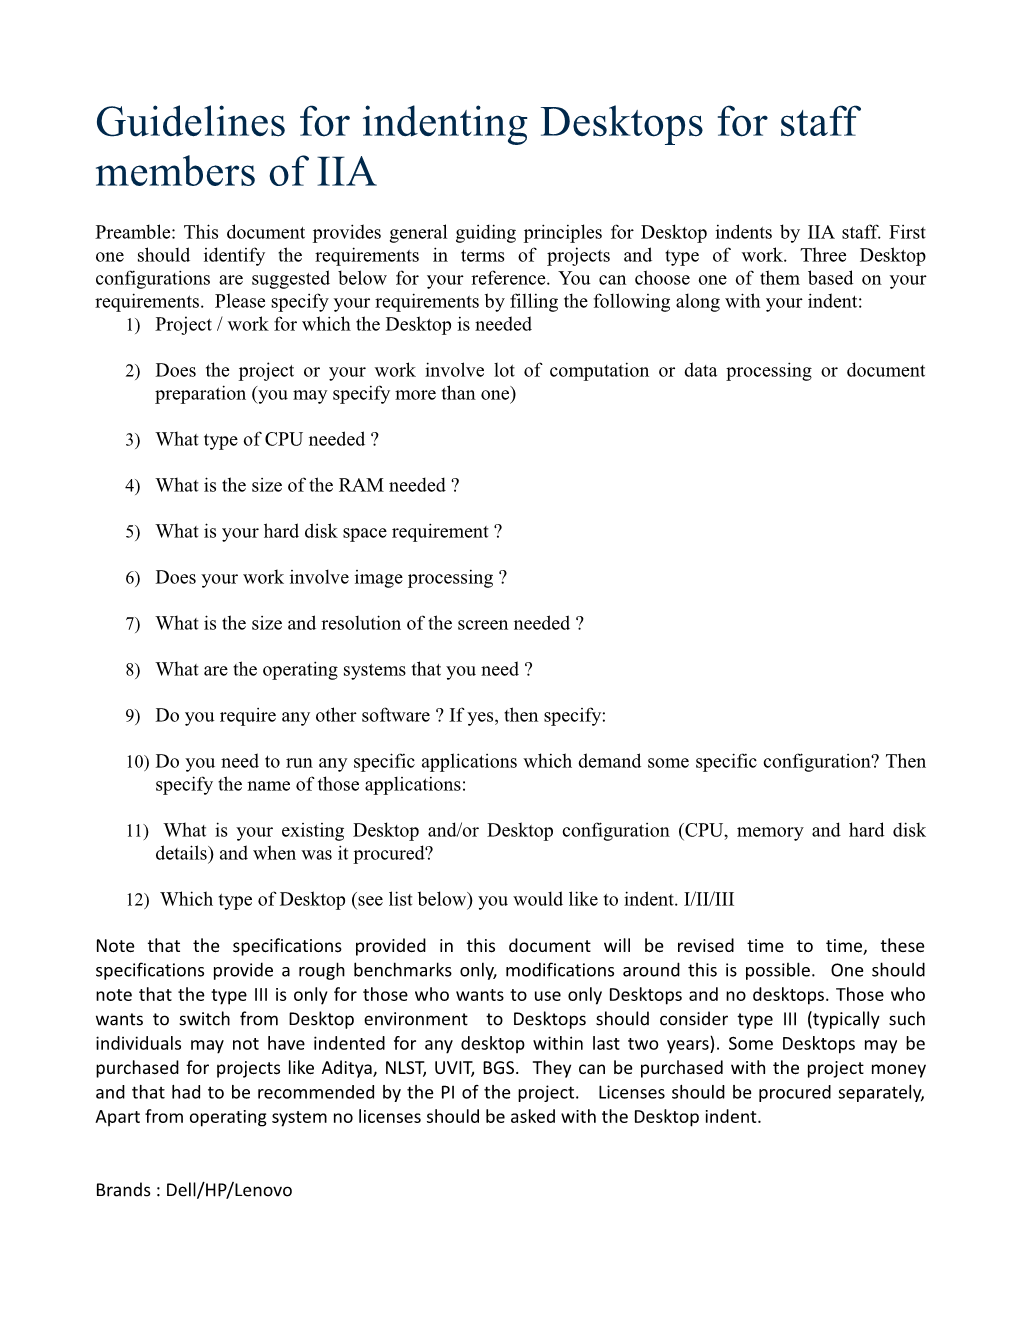 Guidelines for Indenting Desktops for Staff Members of IIA